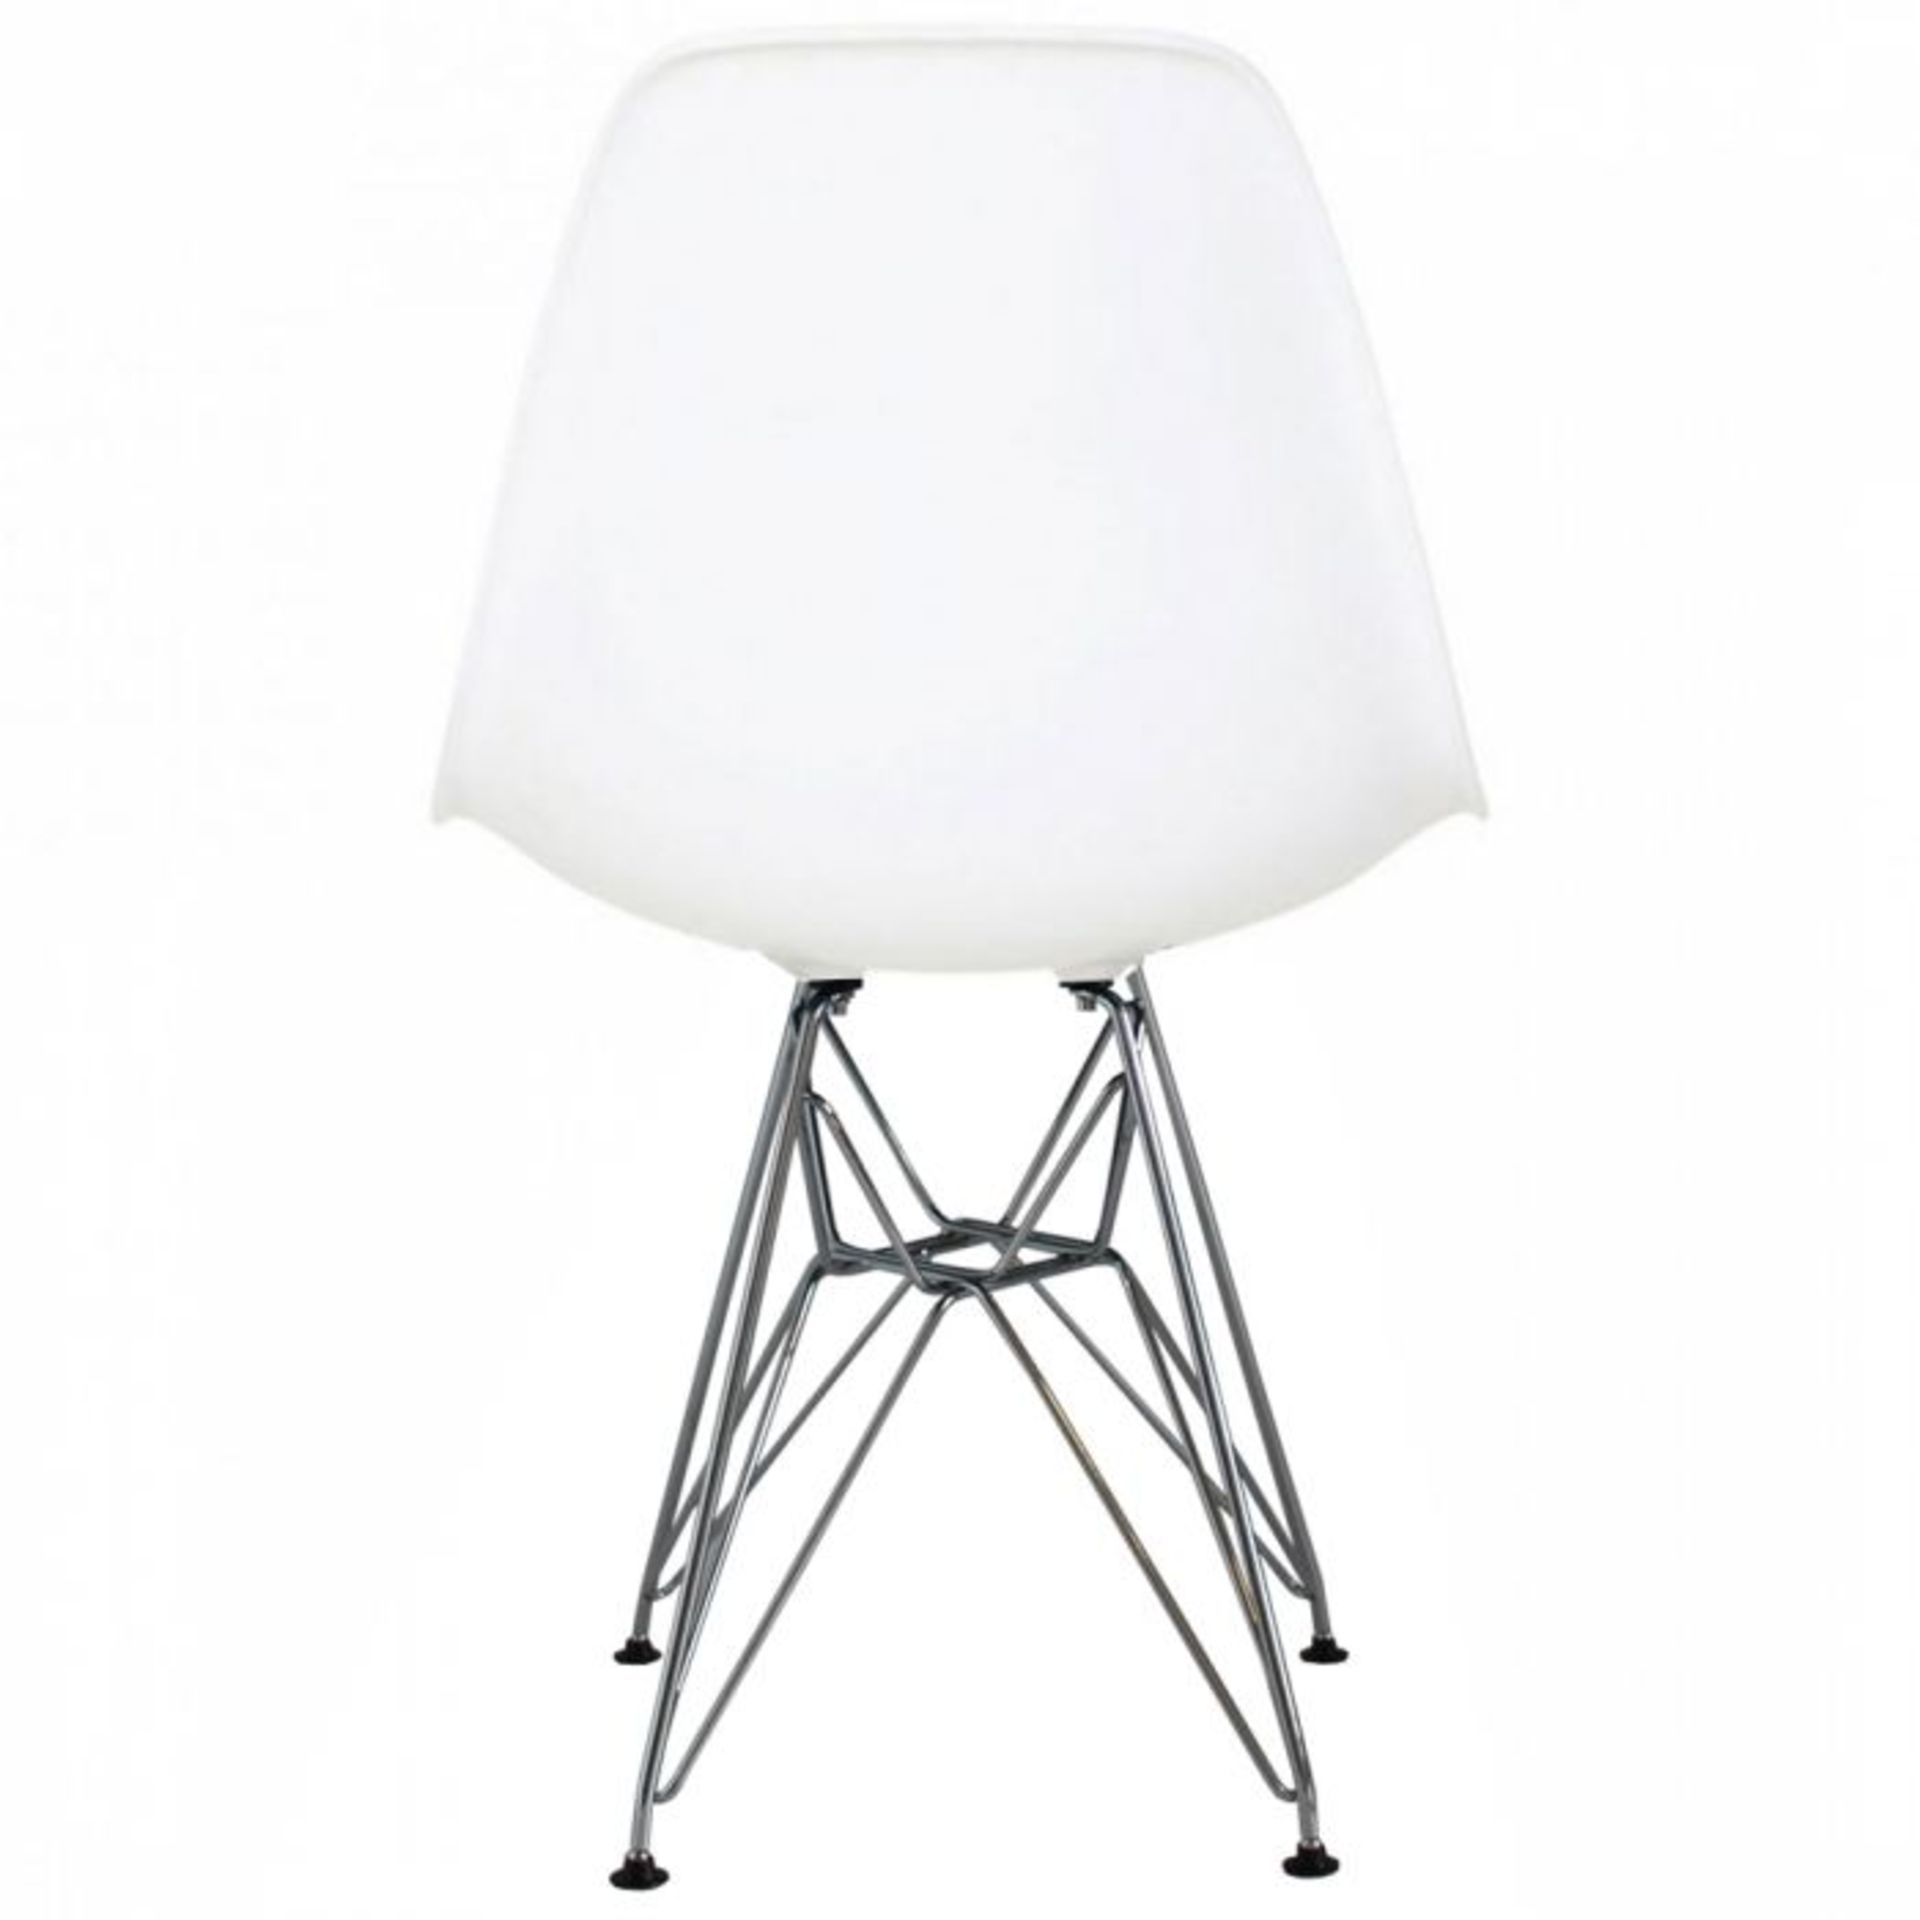 A Set Of 6 x Eames-Style Dining Chairs in White - Includes 2 x Carvers - Classic Design With Deep - Image 3 of 6